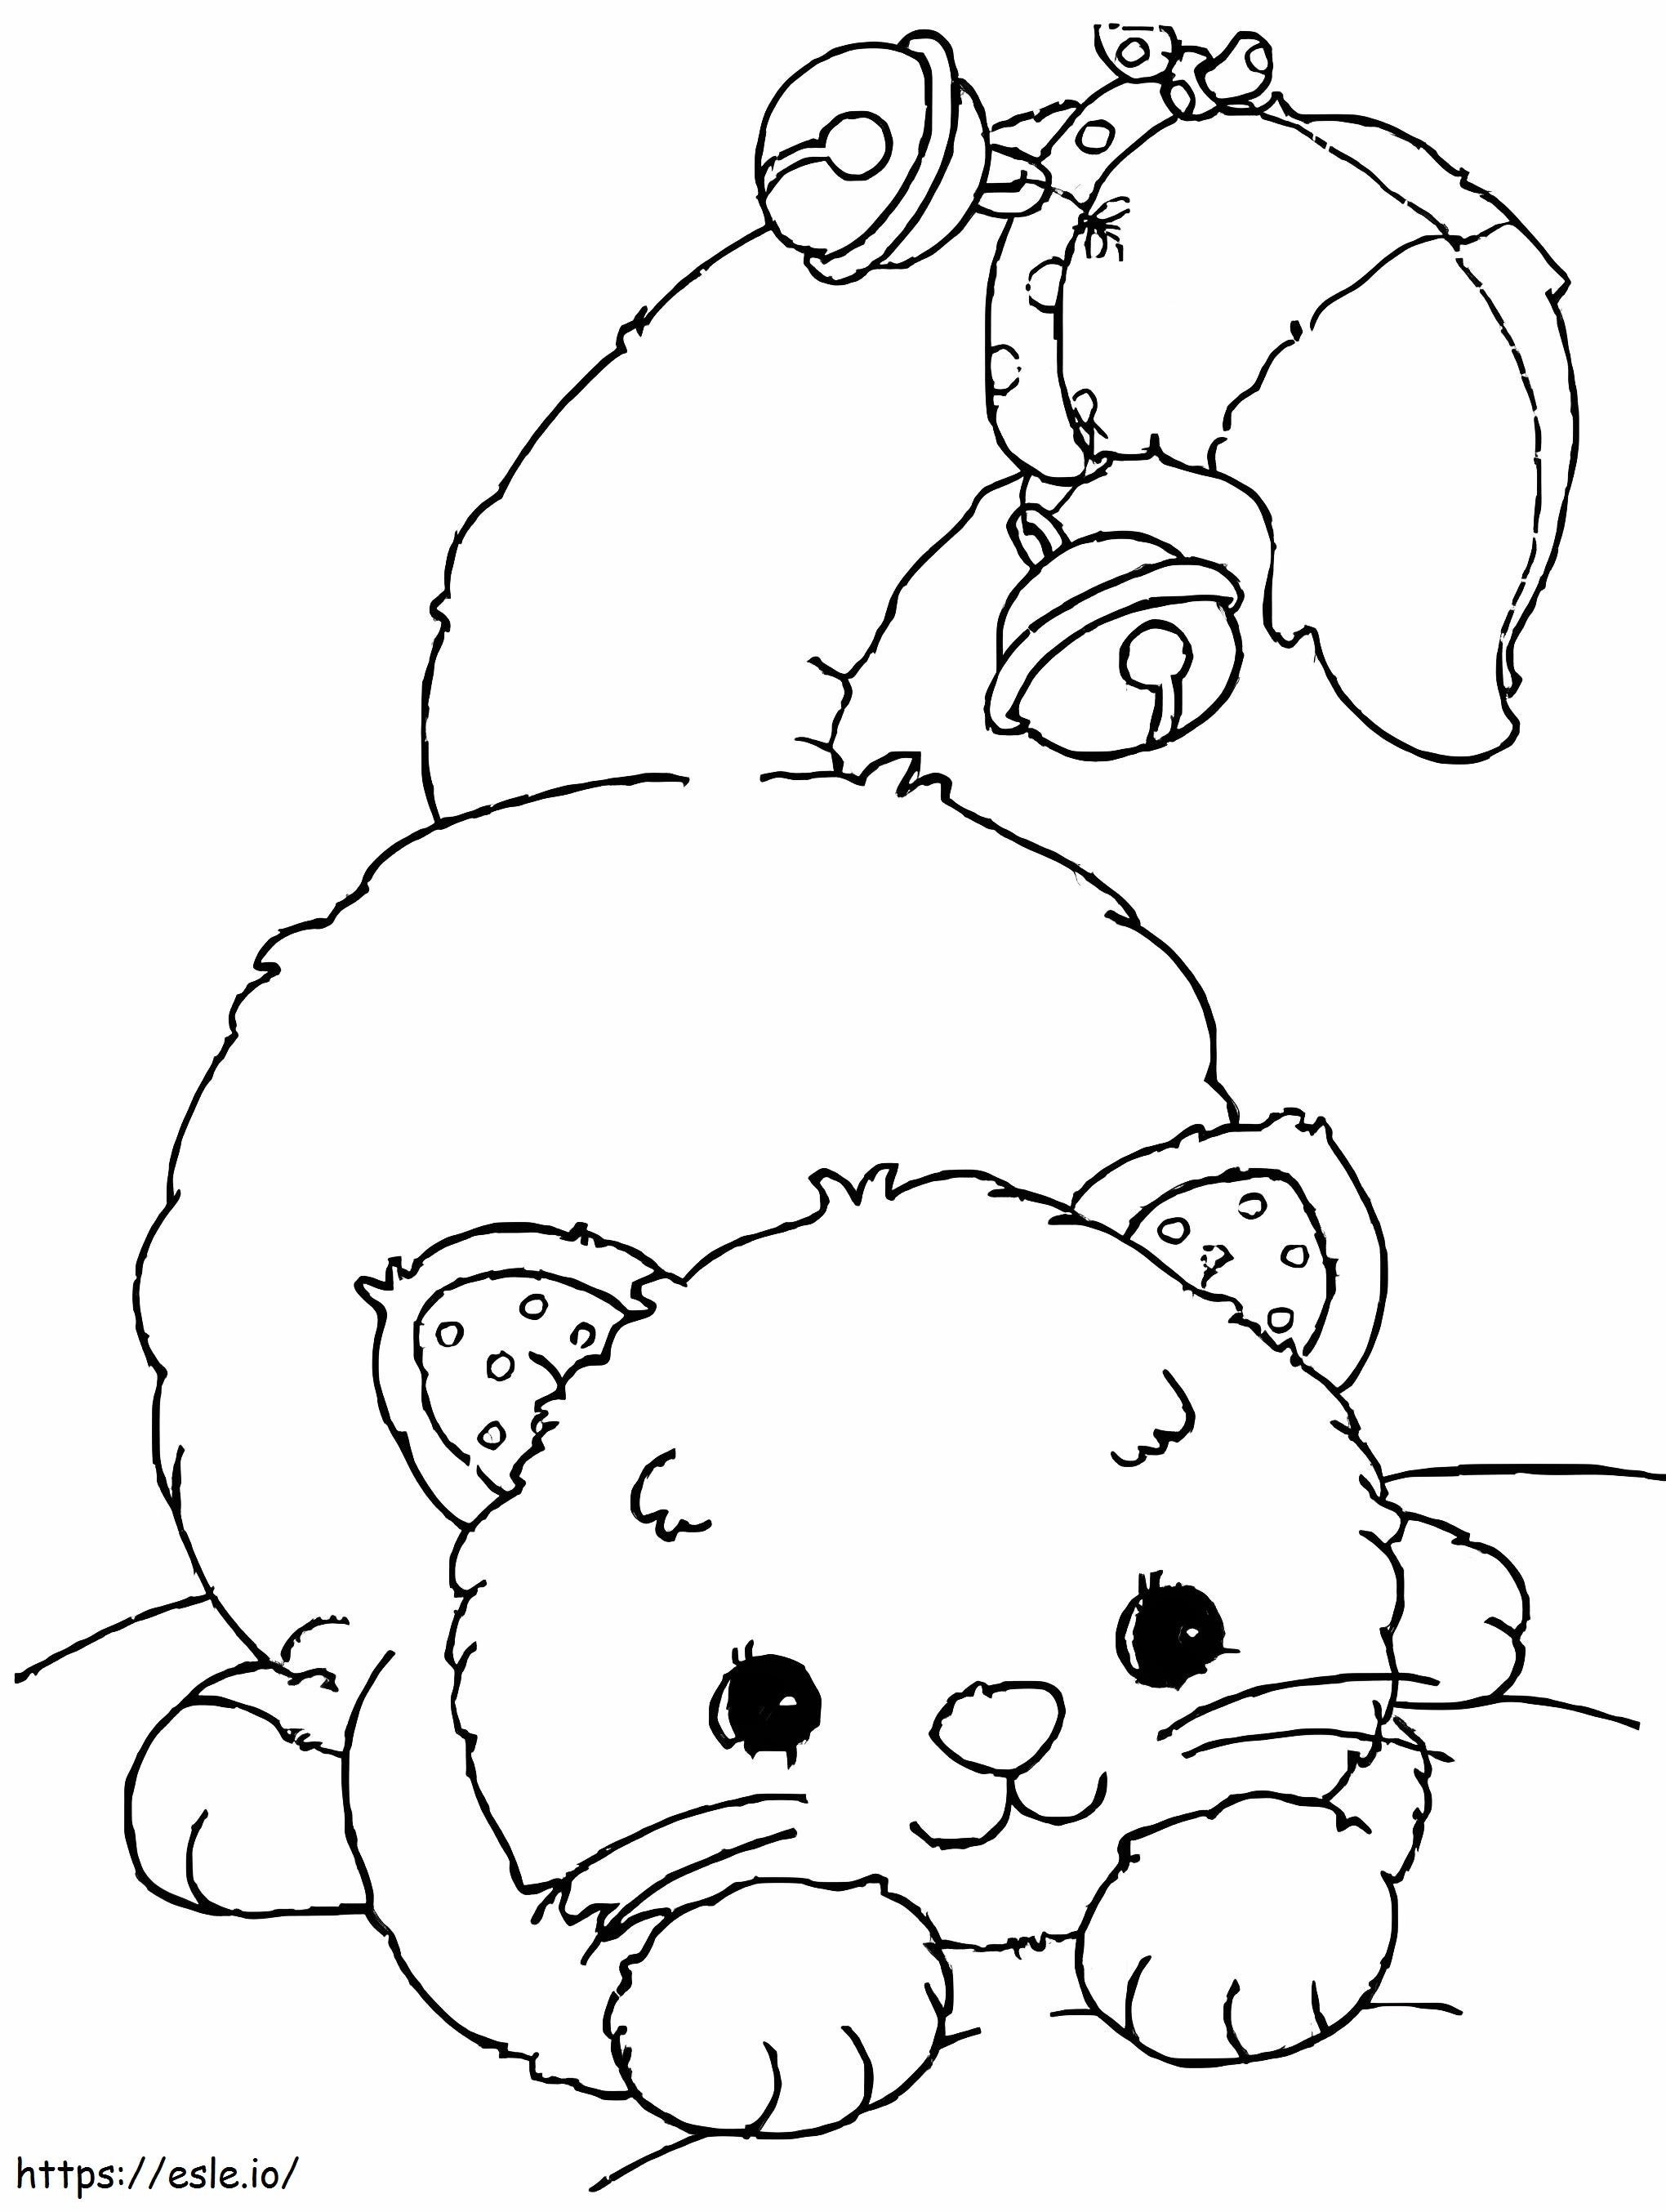 Kitten With Bell coloring page